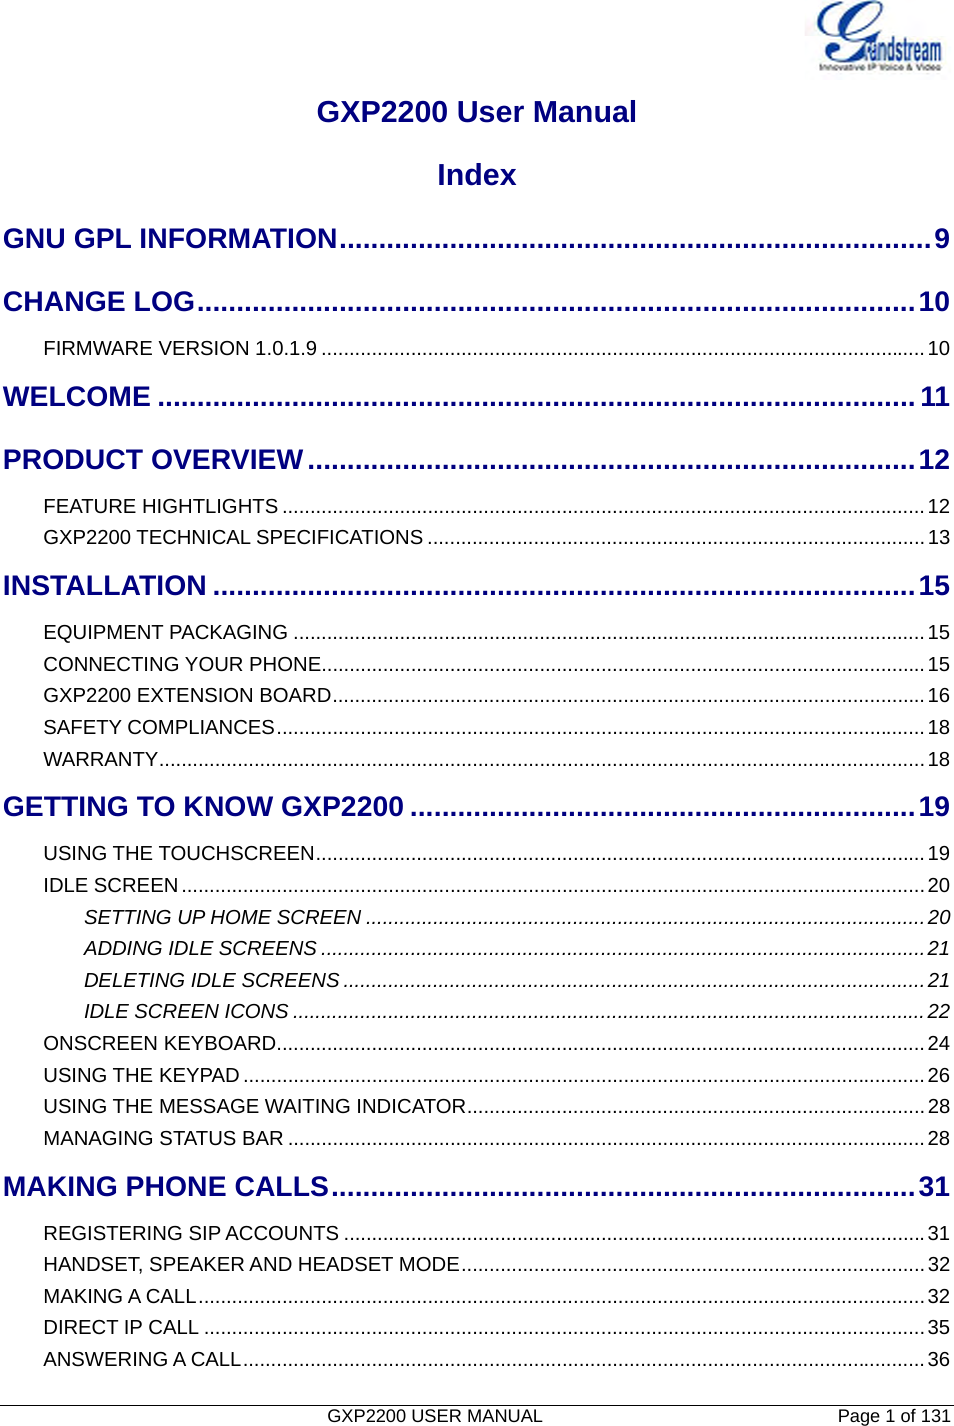   GXP2200 USER MANUAL       Page 1 of 131                                  GXP2200 User Manual Index GNU GPL INFORMATION...........................................................................9CHANGE LOG...........................................................................................10FIRMWARE VERSION 1.0.1.9 ............................................................................................................10WELCOME ................................................................................................11PRODUCT OVERVIEW.............................................................................12FEATURE HIGHTLIGHTS ...................................................................................................................12GXP2200 TECHNICAL SPECIFICATIONS .........................................................................................13INSTALLATION .........................................................................................15EQUIPMENT PACKAGING .................................................................................................................15CONNECTING YOUR PHONE............................................................................................................15GXP2200 EXTENSION BOARD..........................................................................................................16SAFETY COMPLIANCES....................................................................................................................18WARRANTY.........................................................................................................................................18GETTING TO KNOW GXP2200 ................................................................19USING THE TOUCHSCREEN.............................................................................................................19IDLE SCREEN.....................................................................................................................................20SETTING UP HOME SCREEN ....................................................................................................20ADDING IDLE SCREENS ............................................................................................................21DELETING IDLE SCREENS ........................................................................................................21IDLE SCREEN ICONS .................................................................................................................22ONSCREEN KEYBOARD....................................................................................................................24USING THE KEYPAD ..........................................................................................................................26USING THE MESSAGE WAITING INDICATOR..................................................................................28MANAGING STATUS BAR ..................................................................................................................28MAKING PHONE CALLS..........................................................................31REGISTERING SIP ACCOUNTS ........................................................................................................31HANDSET, SPEAKER AND HEADSET MODE...................................................................................32MAKING A CALL..................................................................................................................................32DIRECT IP CALL .................................................................................................................................35ANSWERING A CALL..........................................................................................................................36